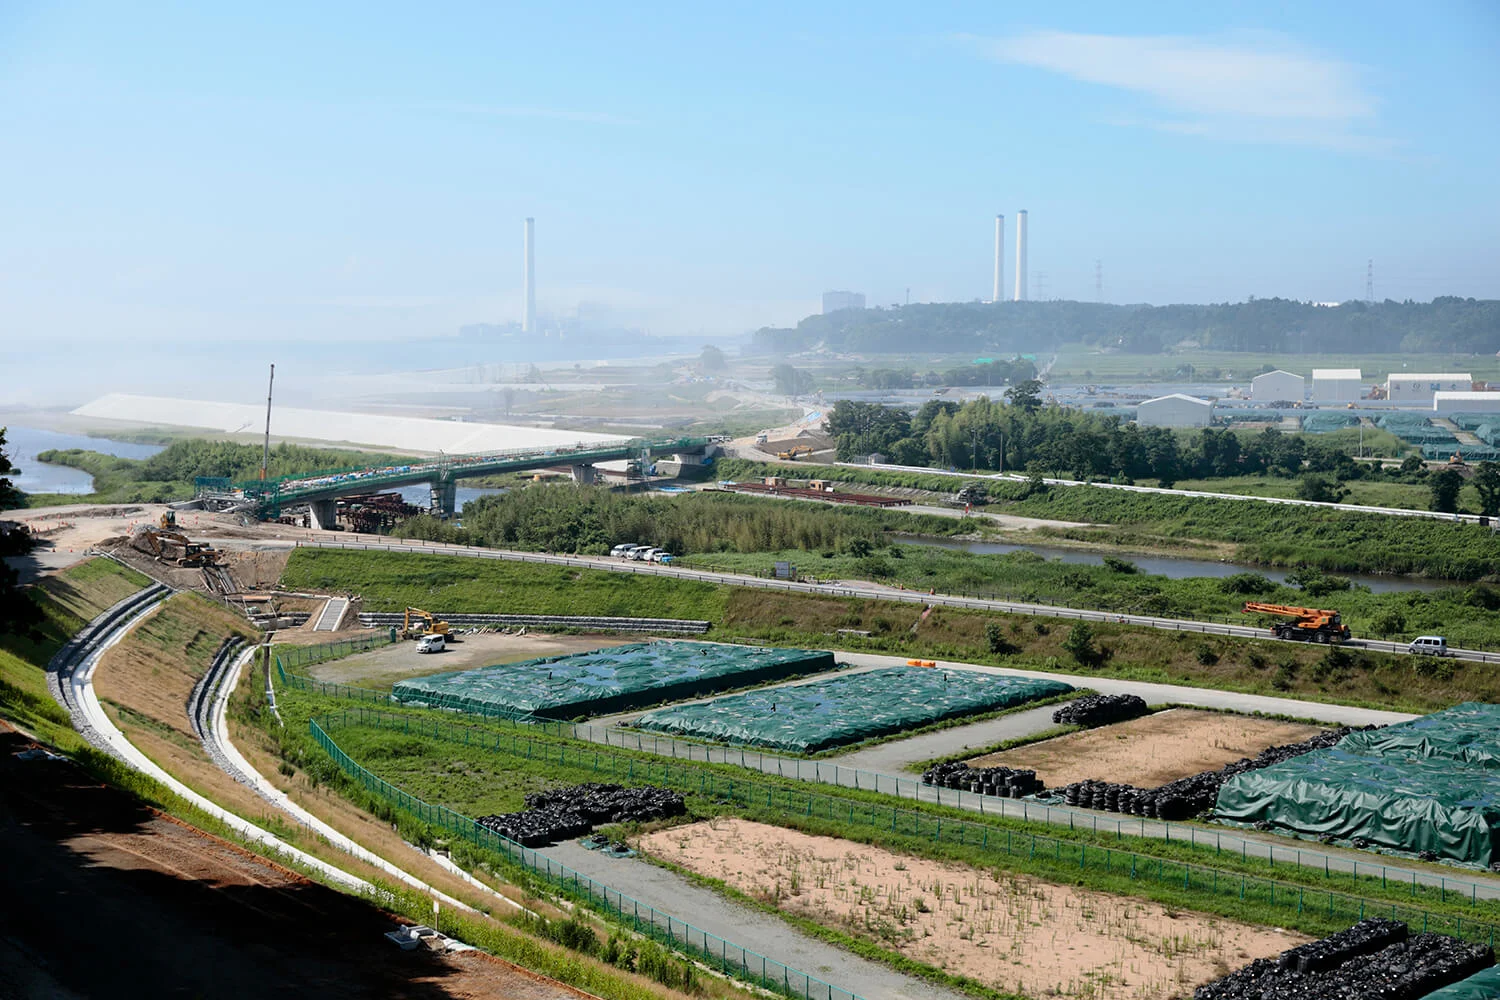 Naraha, 20km from Fukushima Daiichi Nuclear Power Plant. Temporary storage of the waste collected by decontamination works in the foreground, and the reconstruction of the embankment destroyed in the tsunami on the left.